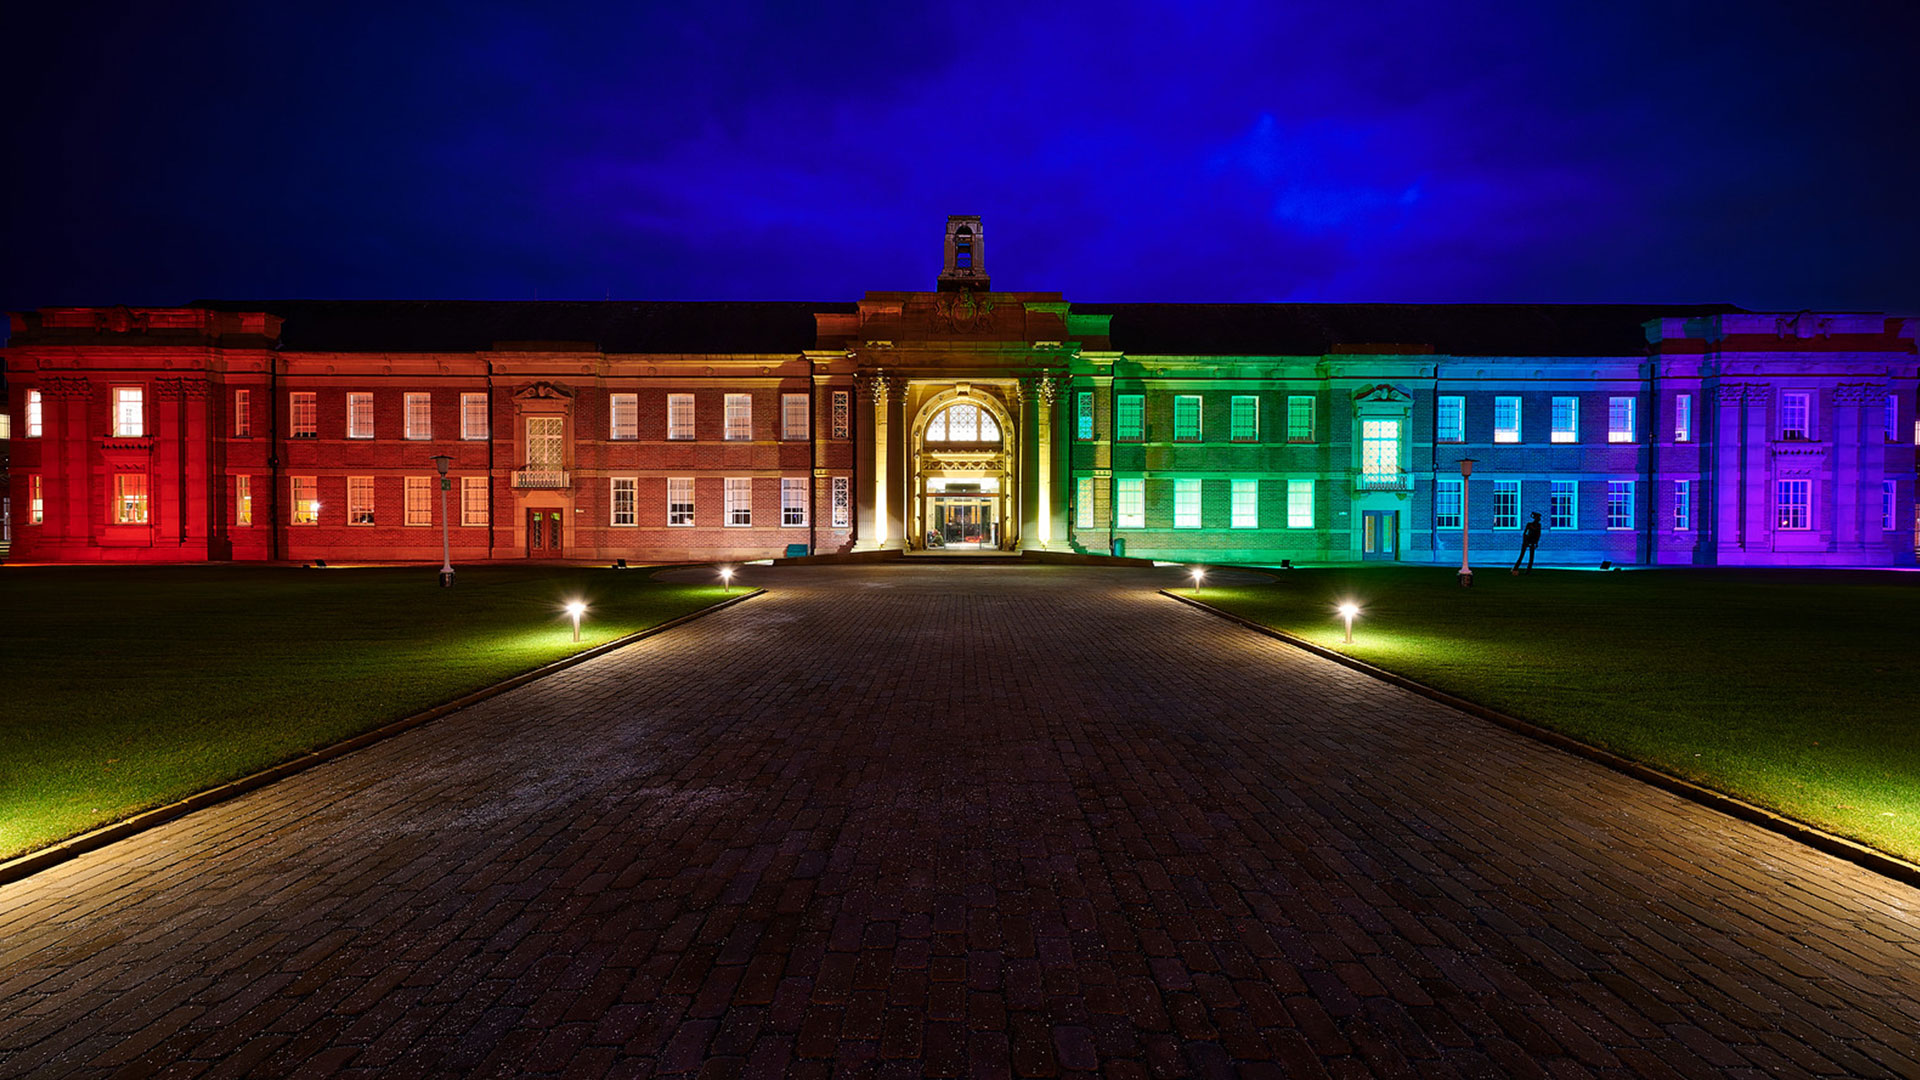 Main building at night lit up in the colours of the rainbow